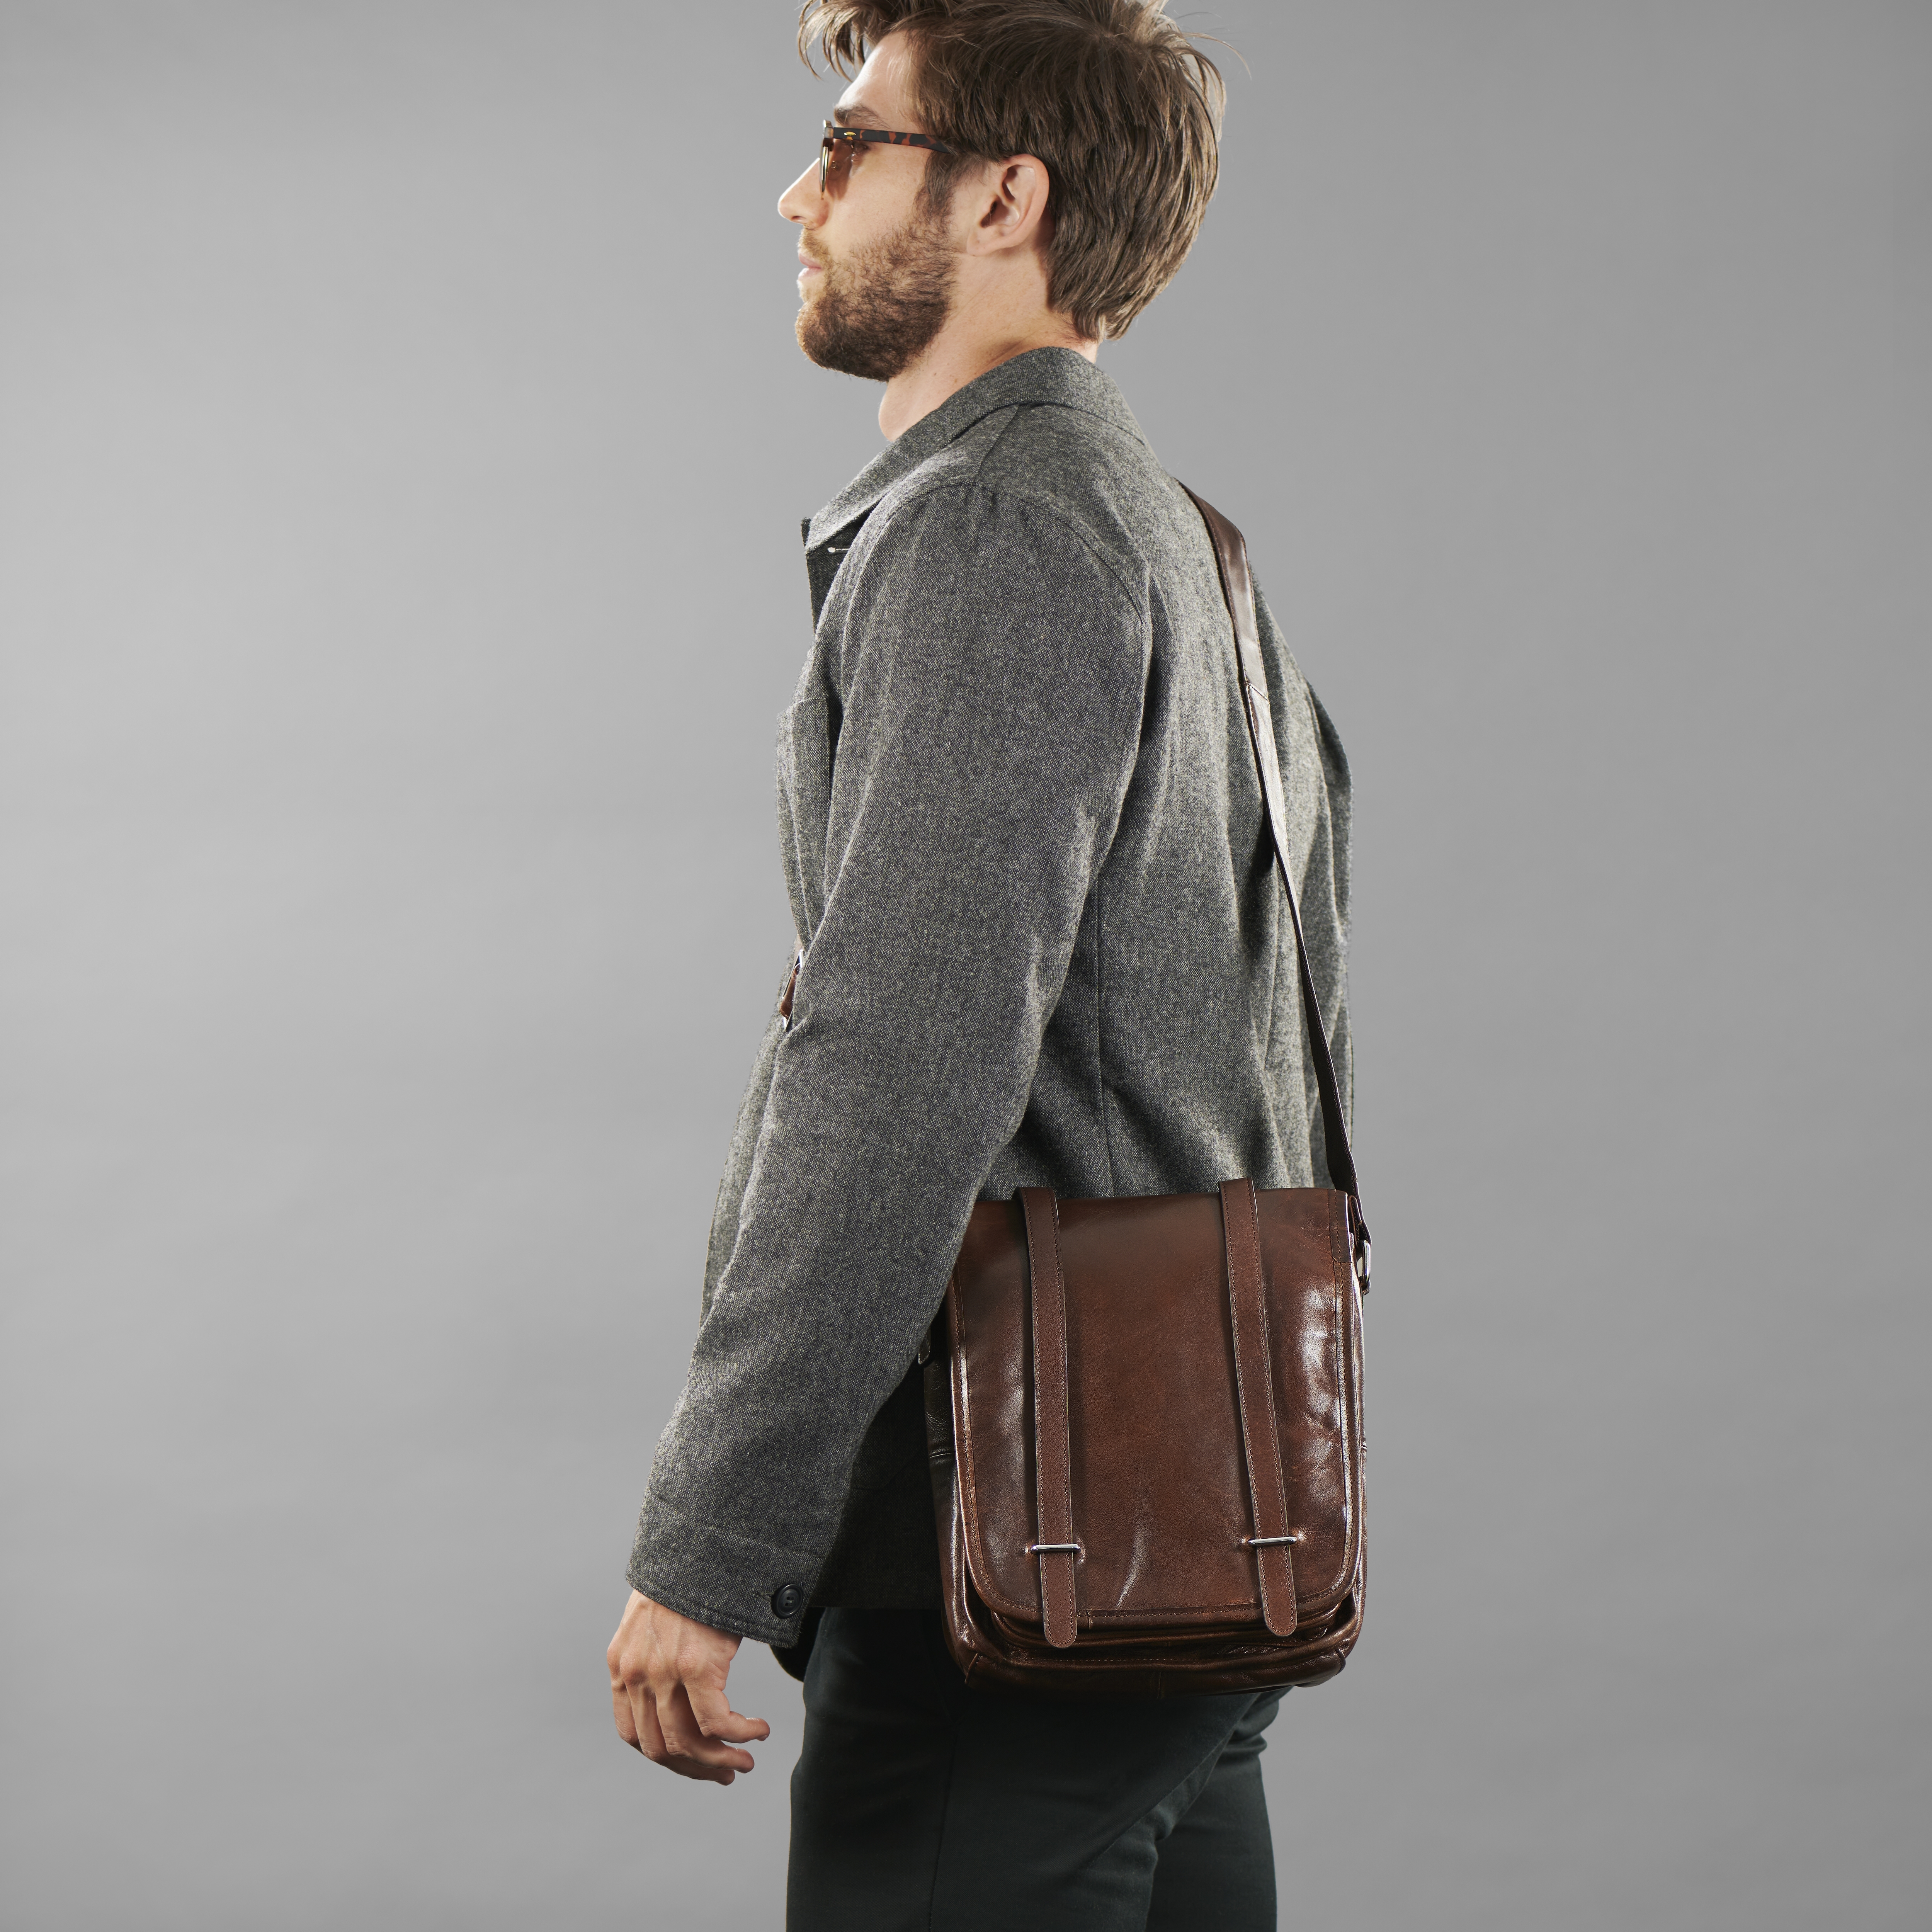 Brown Togo Leather Case, Delton Bags